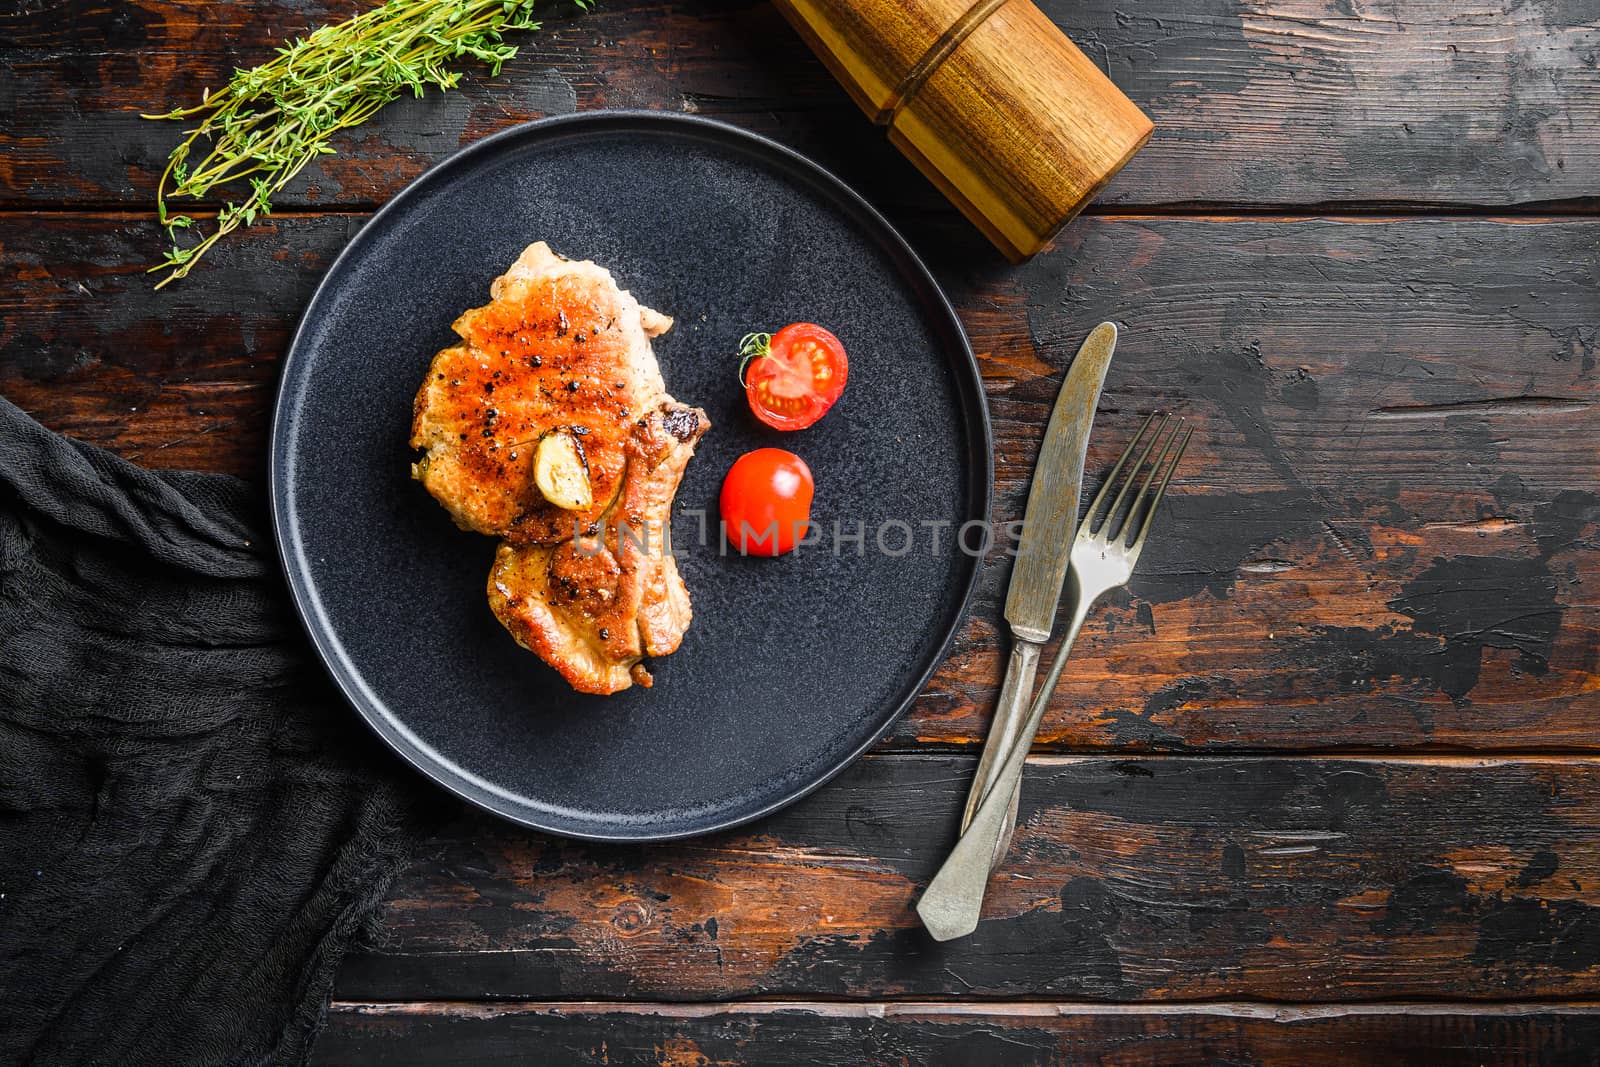 Dish of grilled pork chop with tomatoes top view with knife and fork over old rustic dark wood table table top view space for text by Ilianesolenyi